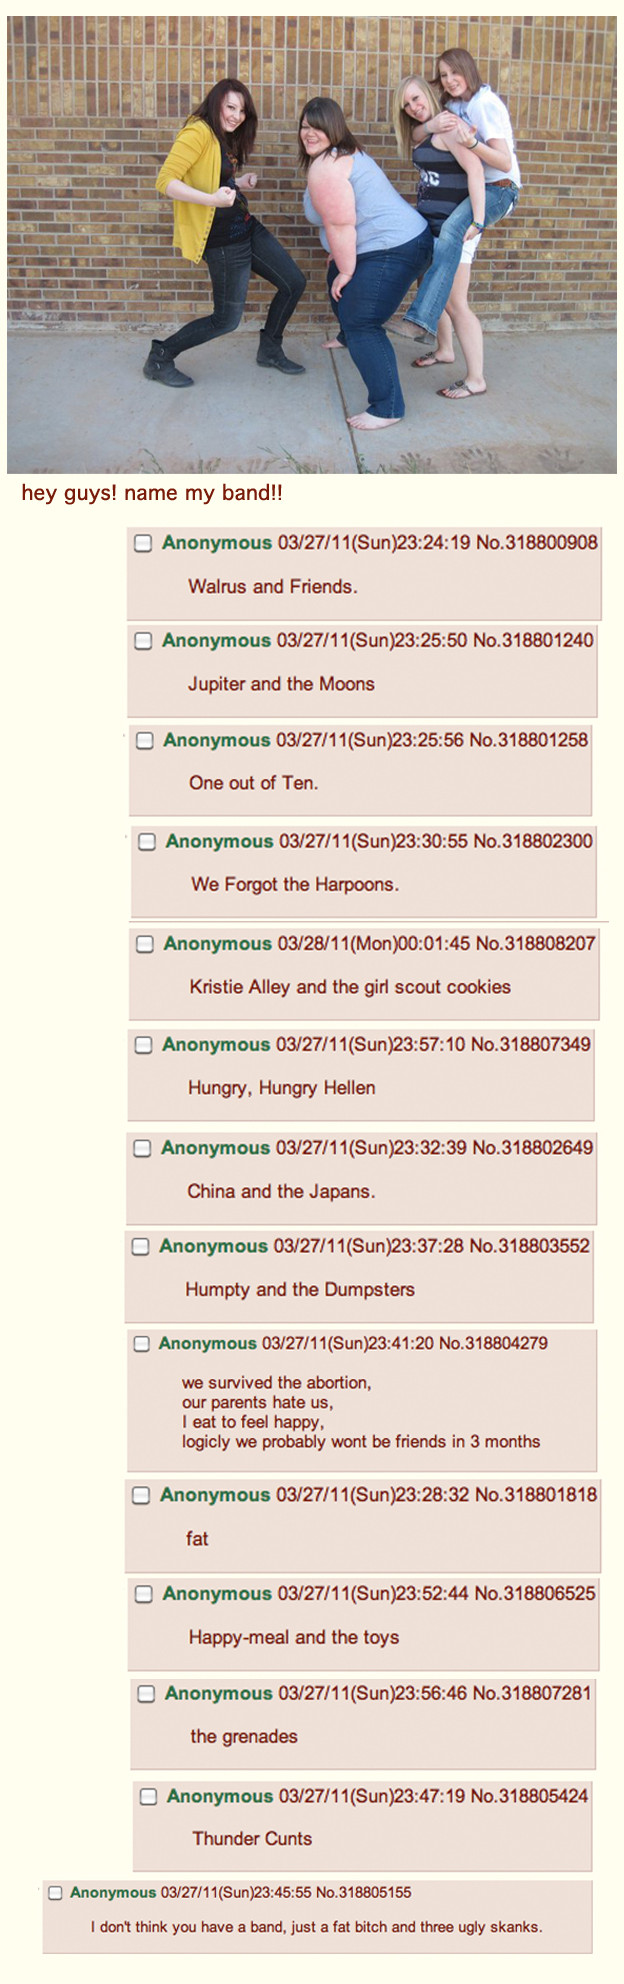 Why you shouldn't ask 4chan to name your band...